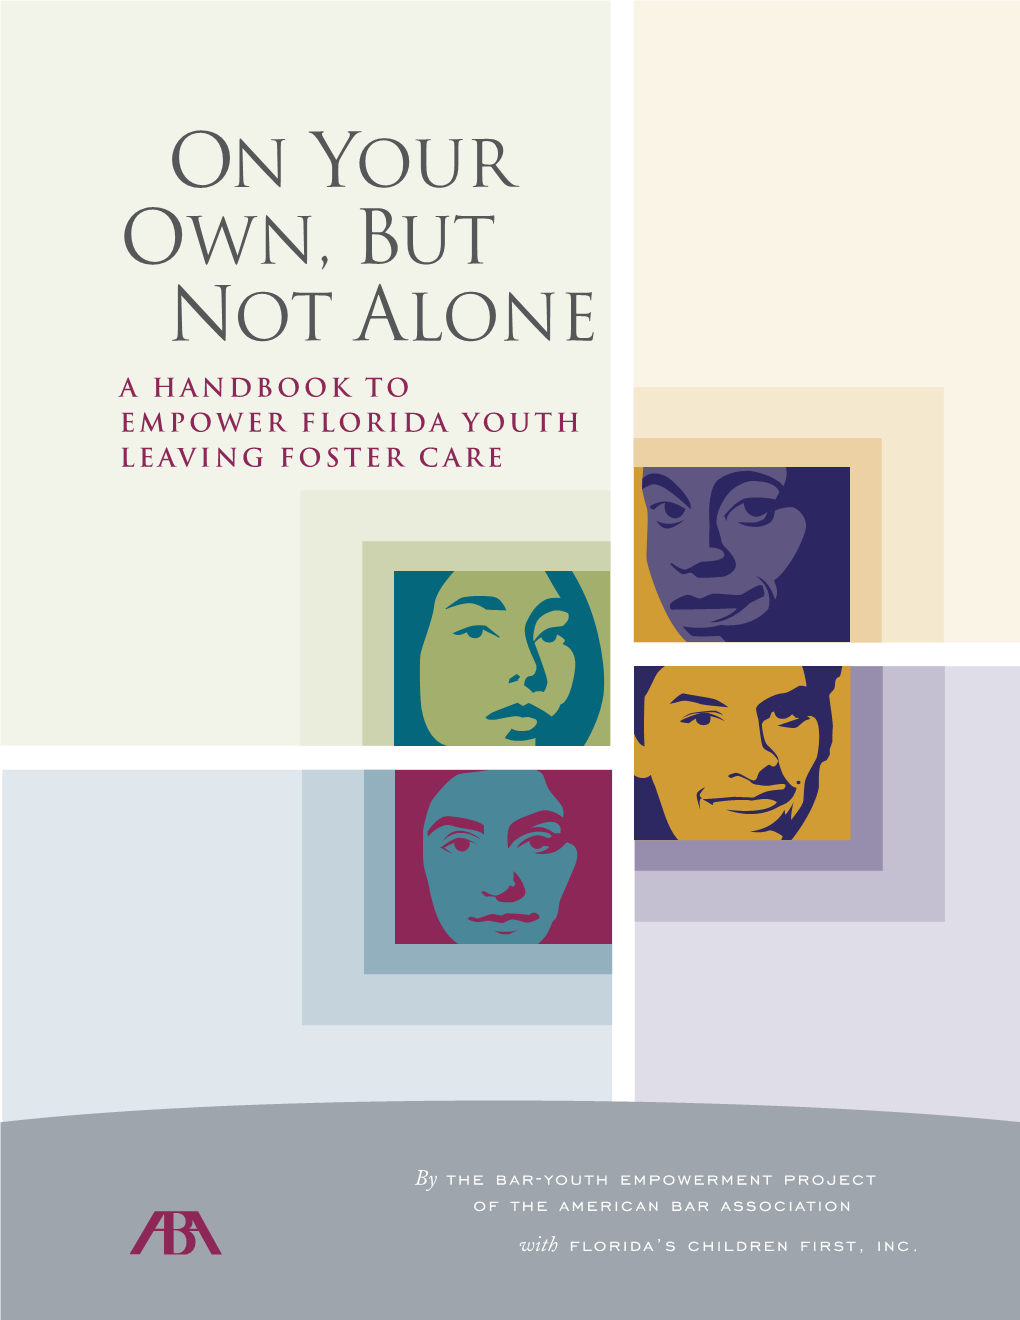 On Your Own, but Not Alone a Handbook to Empower Florida Youth Leaving Foster Care